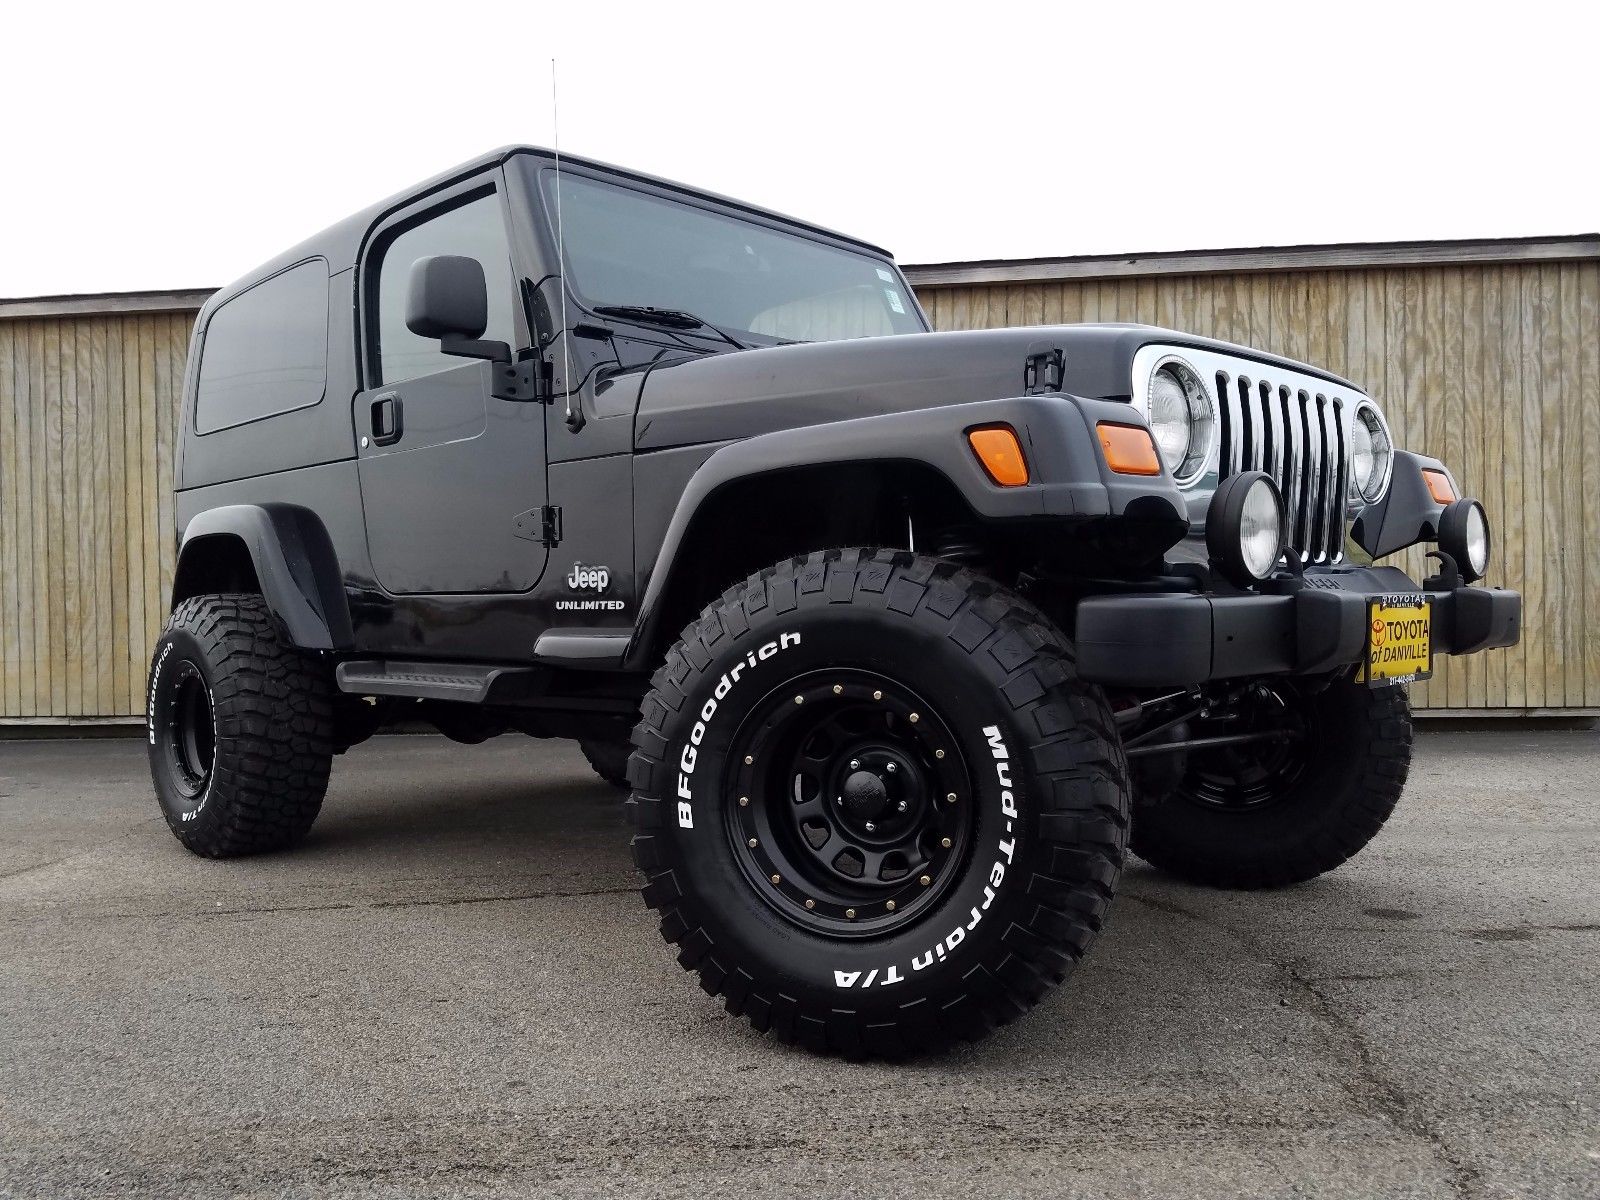 2005 Jeep Wrangler Unlimited 2005 Jeep Wrangler Unlimited 2 Door Hard Top  Lifted Wheel and Tire package 2022 2023 is in stock and for sale - Price &  Review 2022 2023